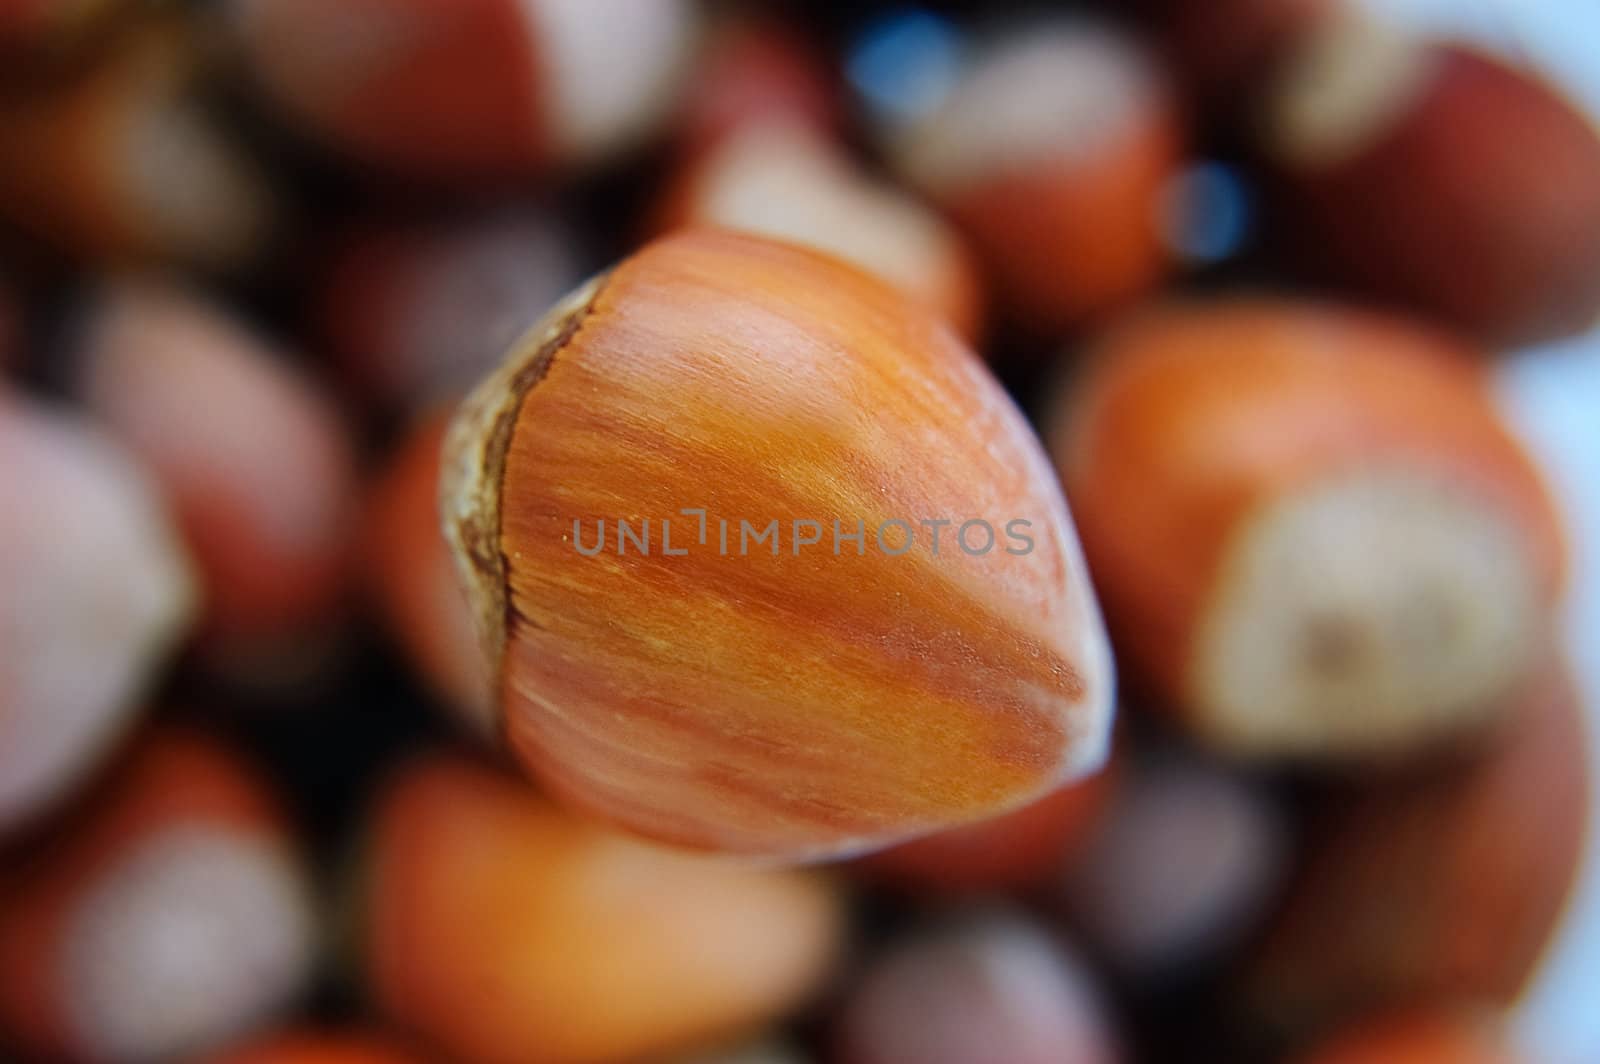 Many hazelnuts as background with one big in focus